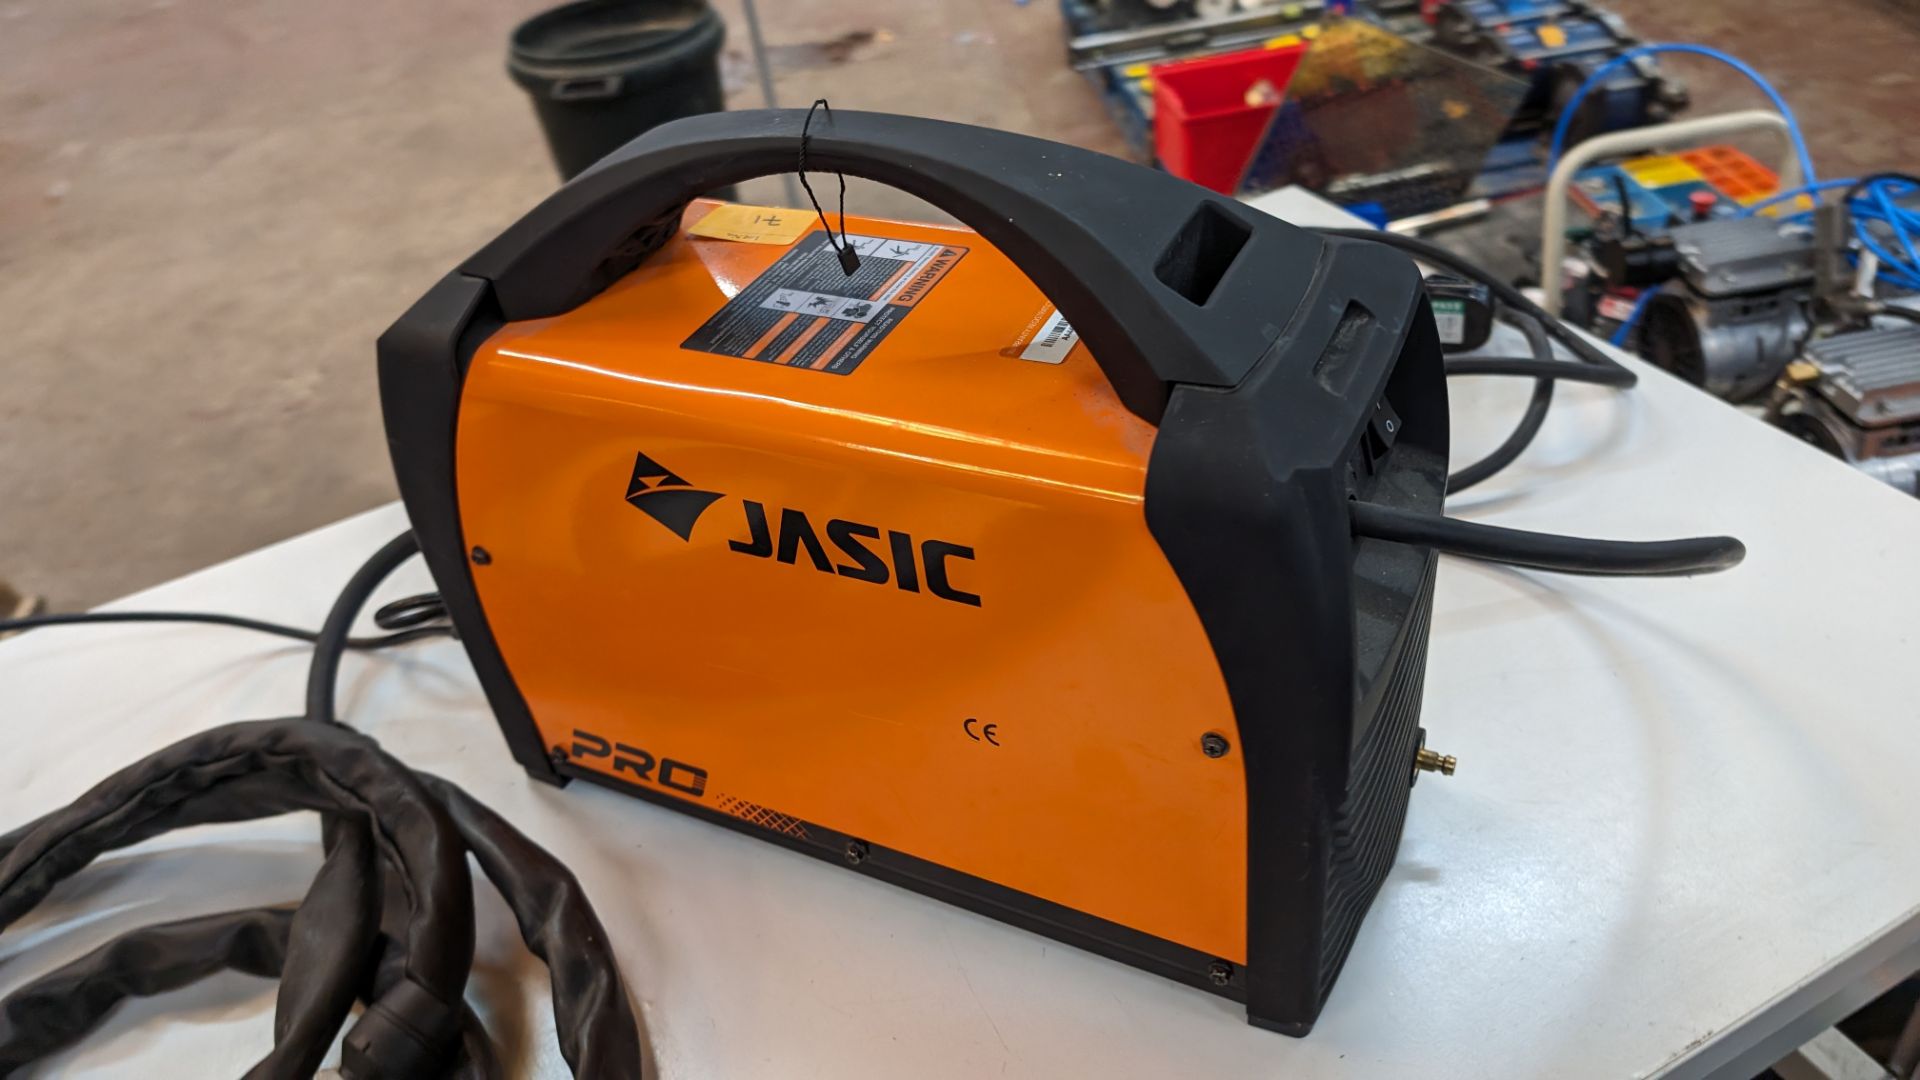 Jasic Pro tig 200 AC/DC pulse welder, including welding mask, box of consumables & other items as pi - Image 10 of 23